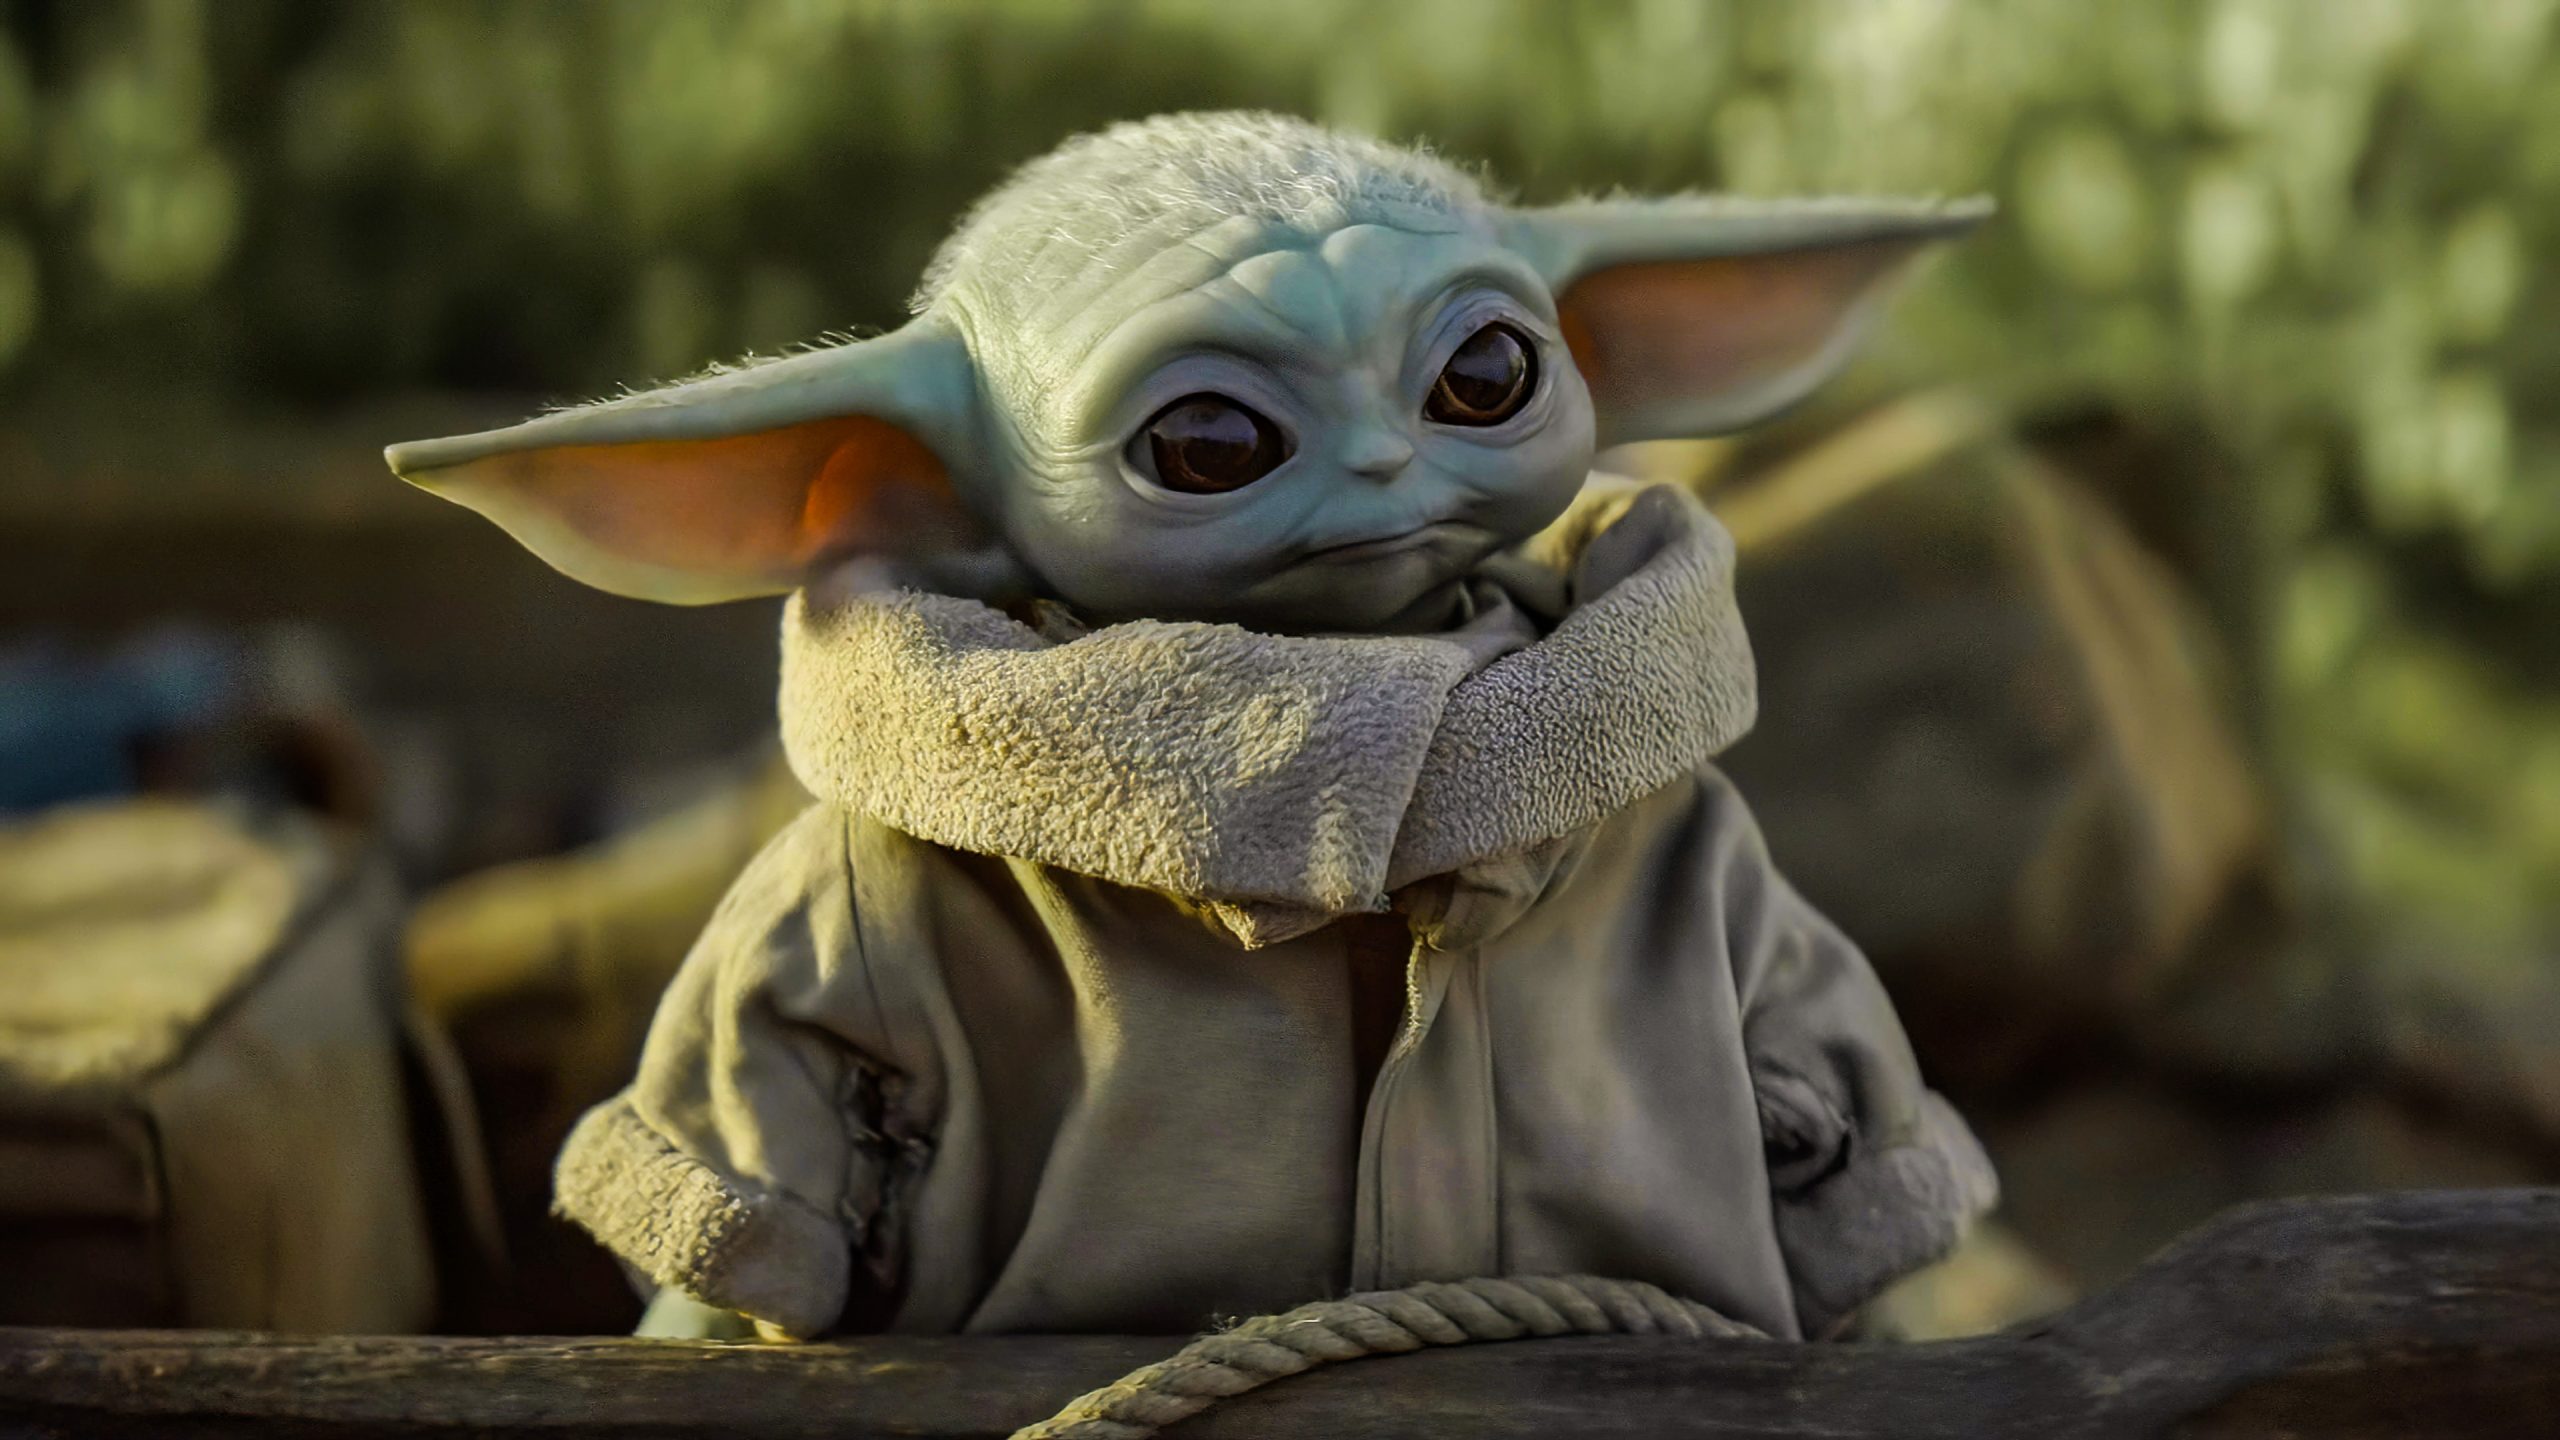 Baby Yoda was created by LucasFilm using both the old and new techniques